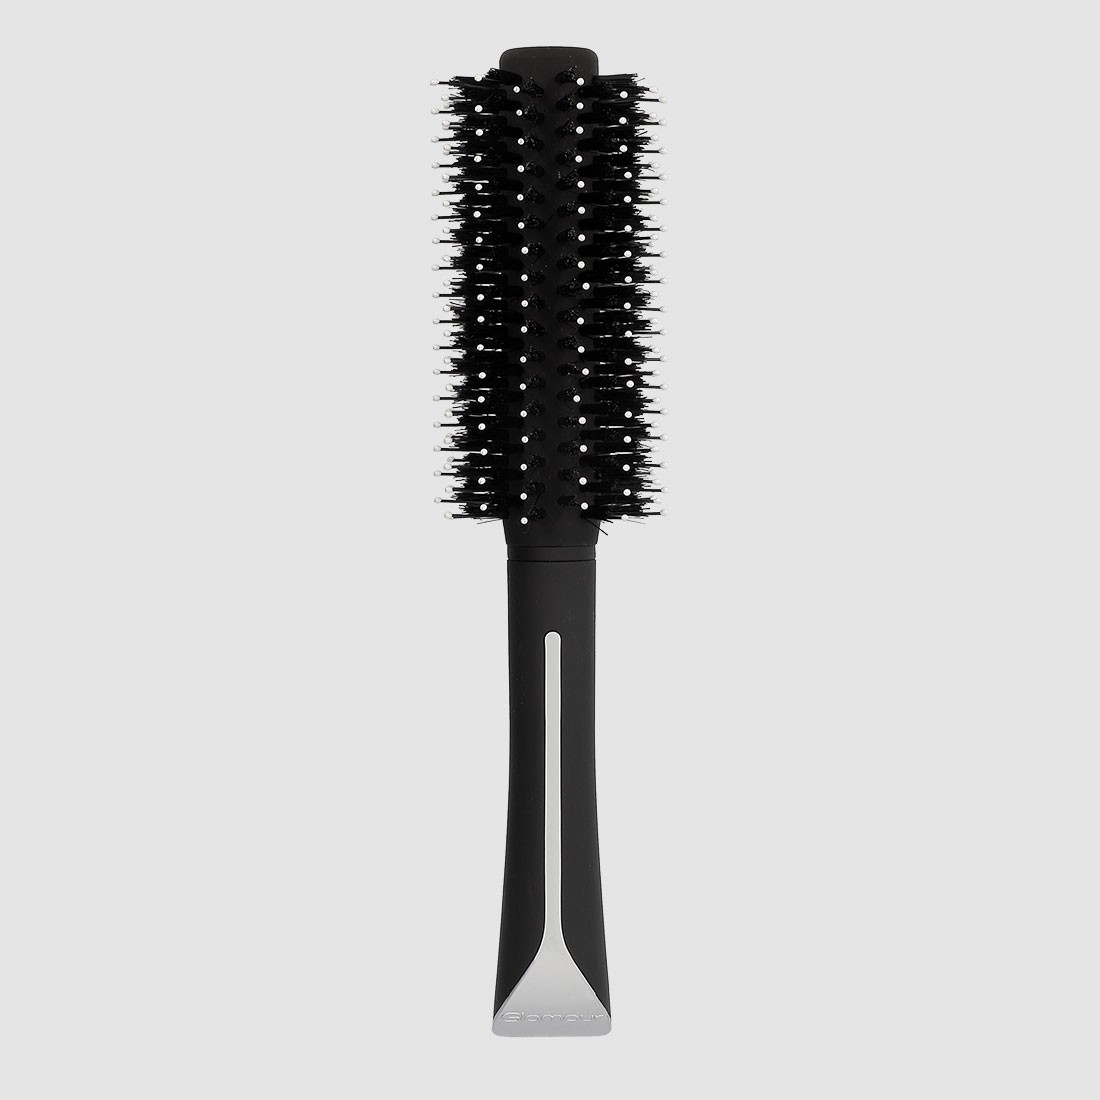 Brosse à cheveux brushing double empoilage - Glamour Paris